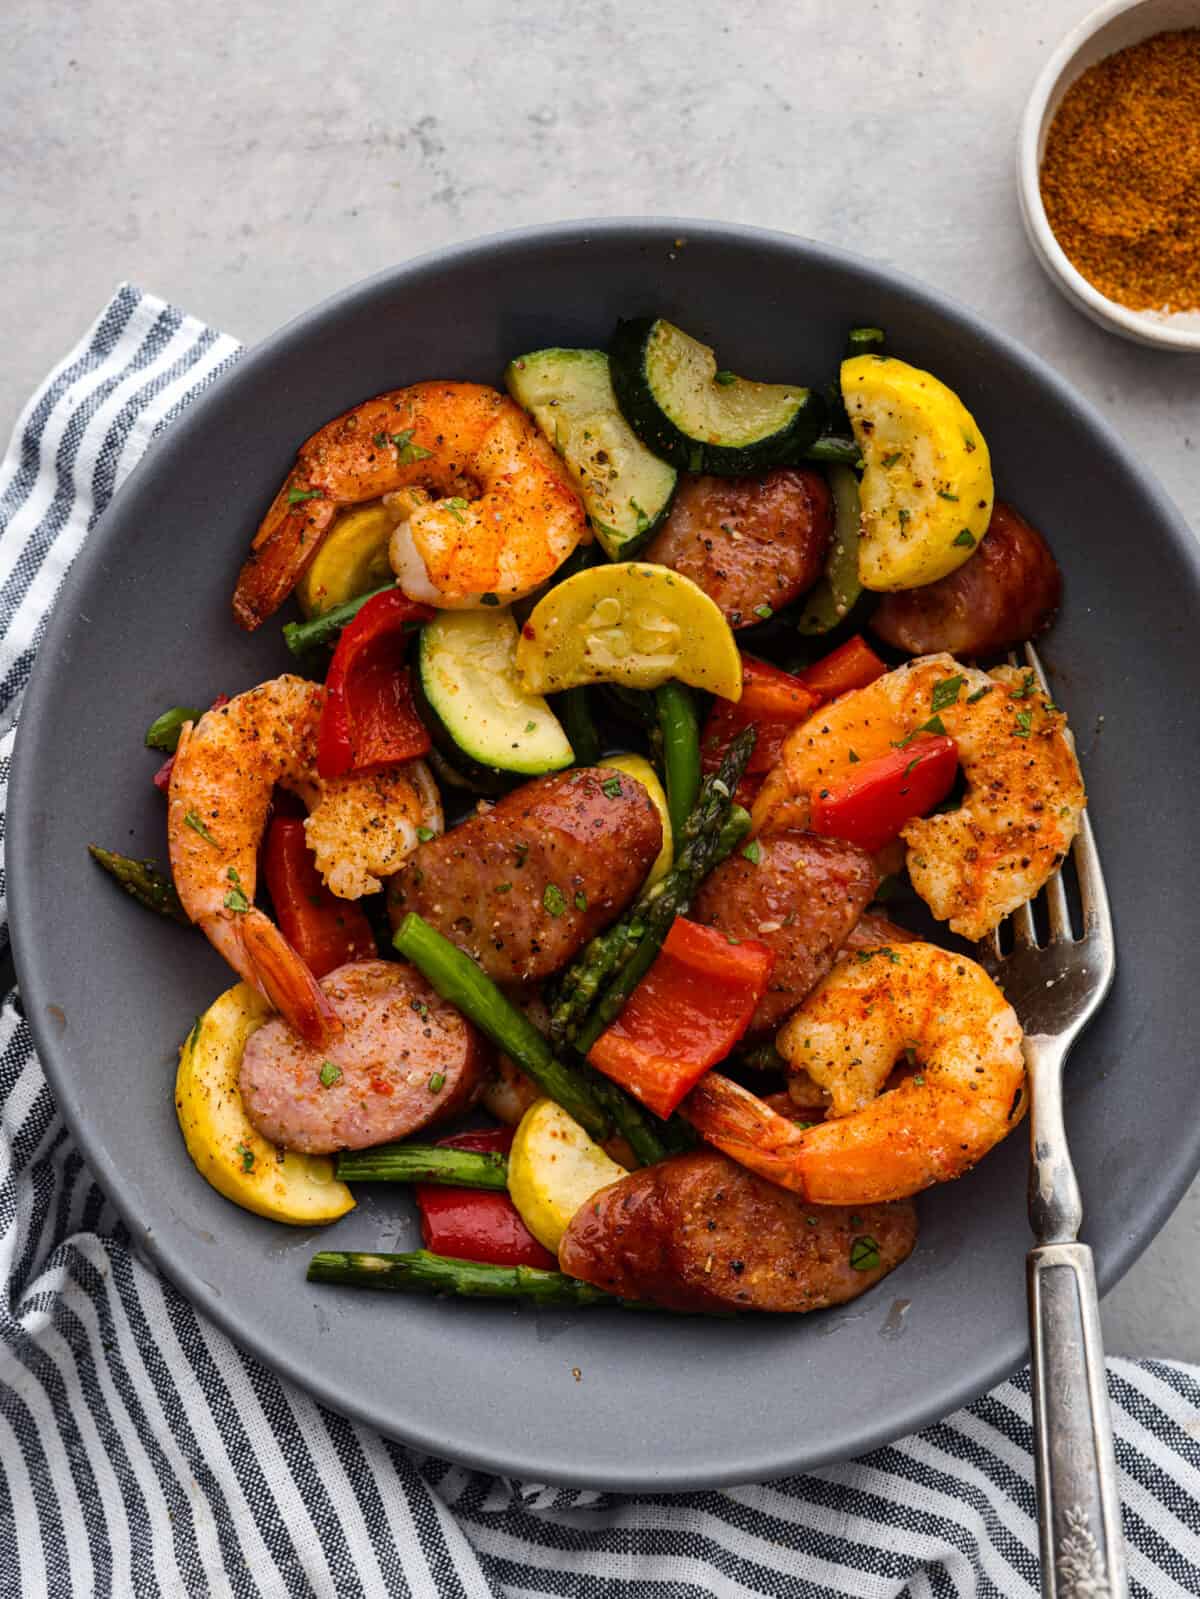 Close view of Cajun shrimp, sausage, and veggies in a gray bowl with a fork.